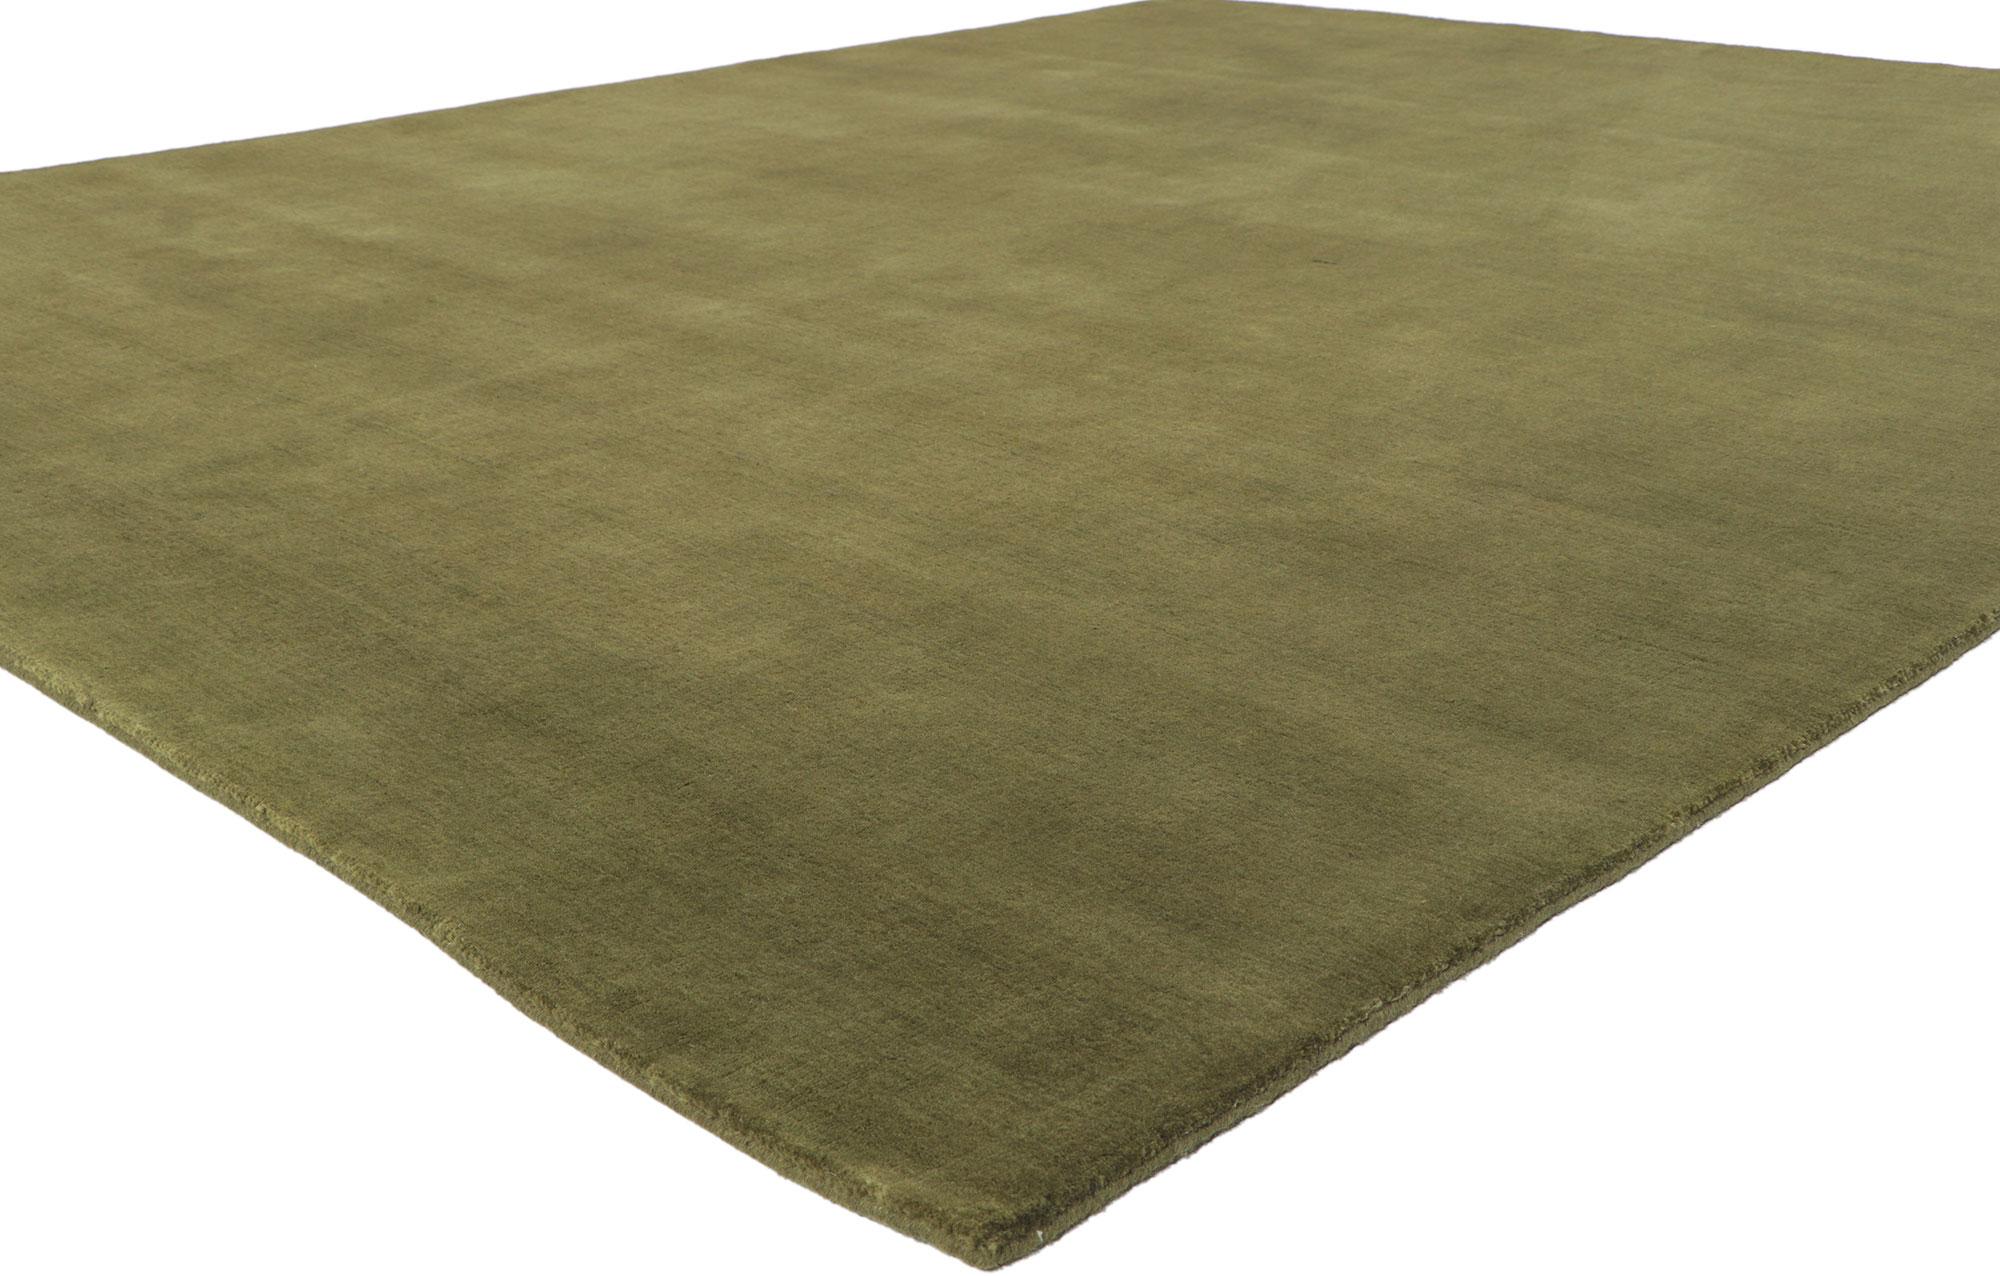 30926 New Moss-Olive Green Modern Rug, 07'11 x 09'11.
Implementing biophilia with subdued ornamentation, this modern area rug is a captivating vision of woven beauty. The lavish texture and earthy green colorway woven into this piece work together